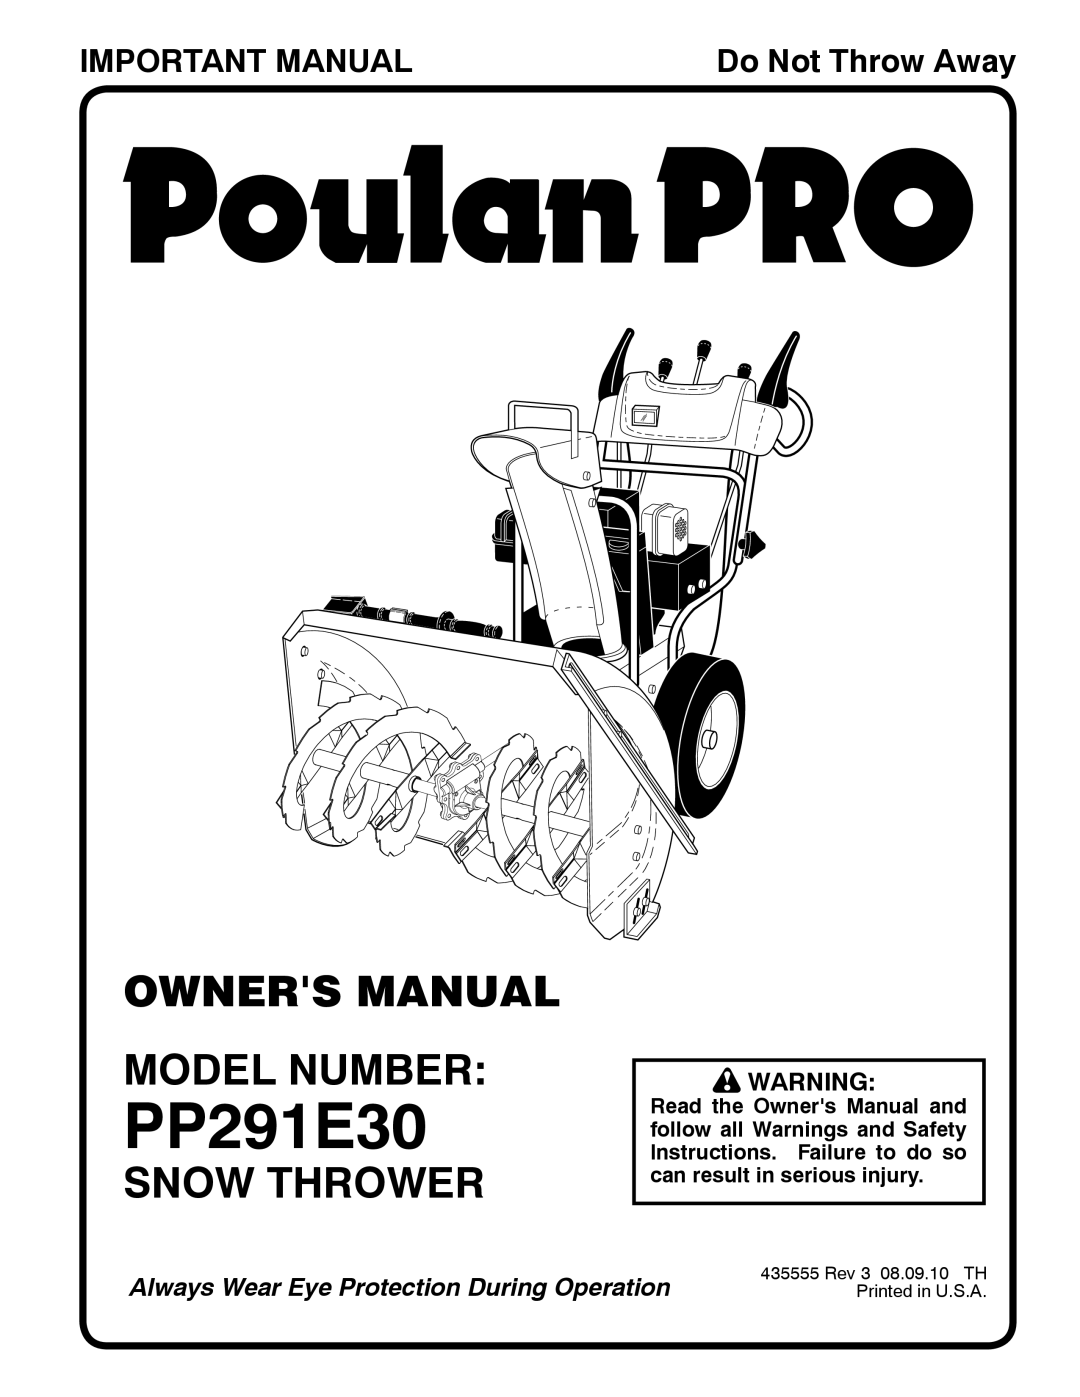 Poulan 96198003001 owner manual Owners Manual Model Number, Snow Thrower, Important Manual, PP291E30, Do Not Throw Away 